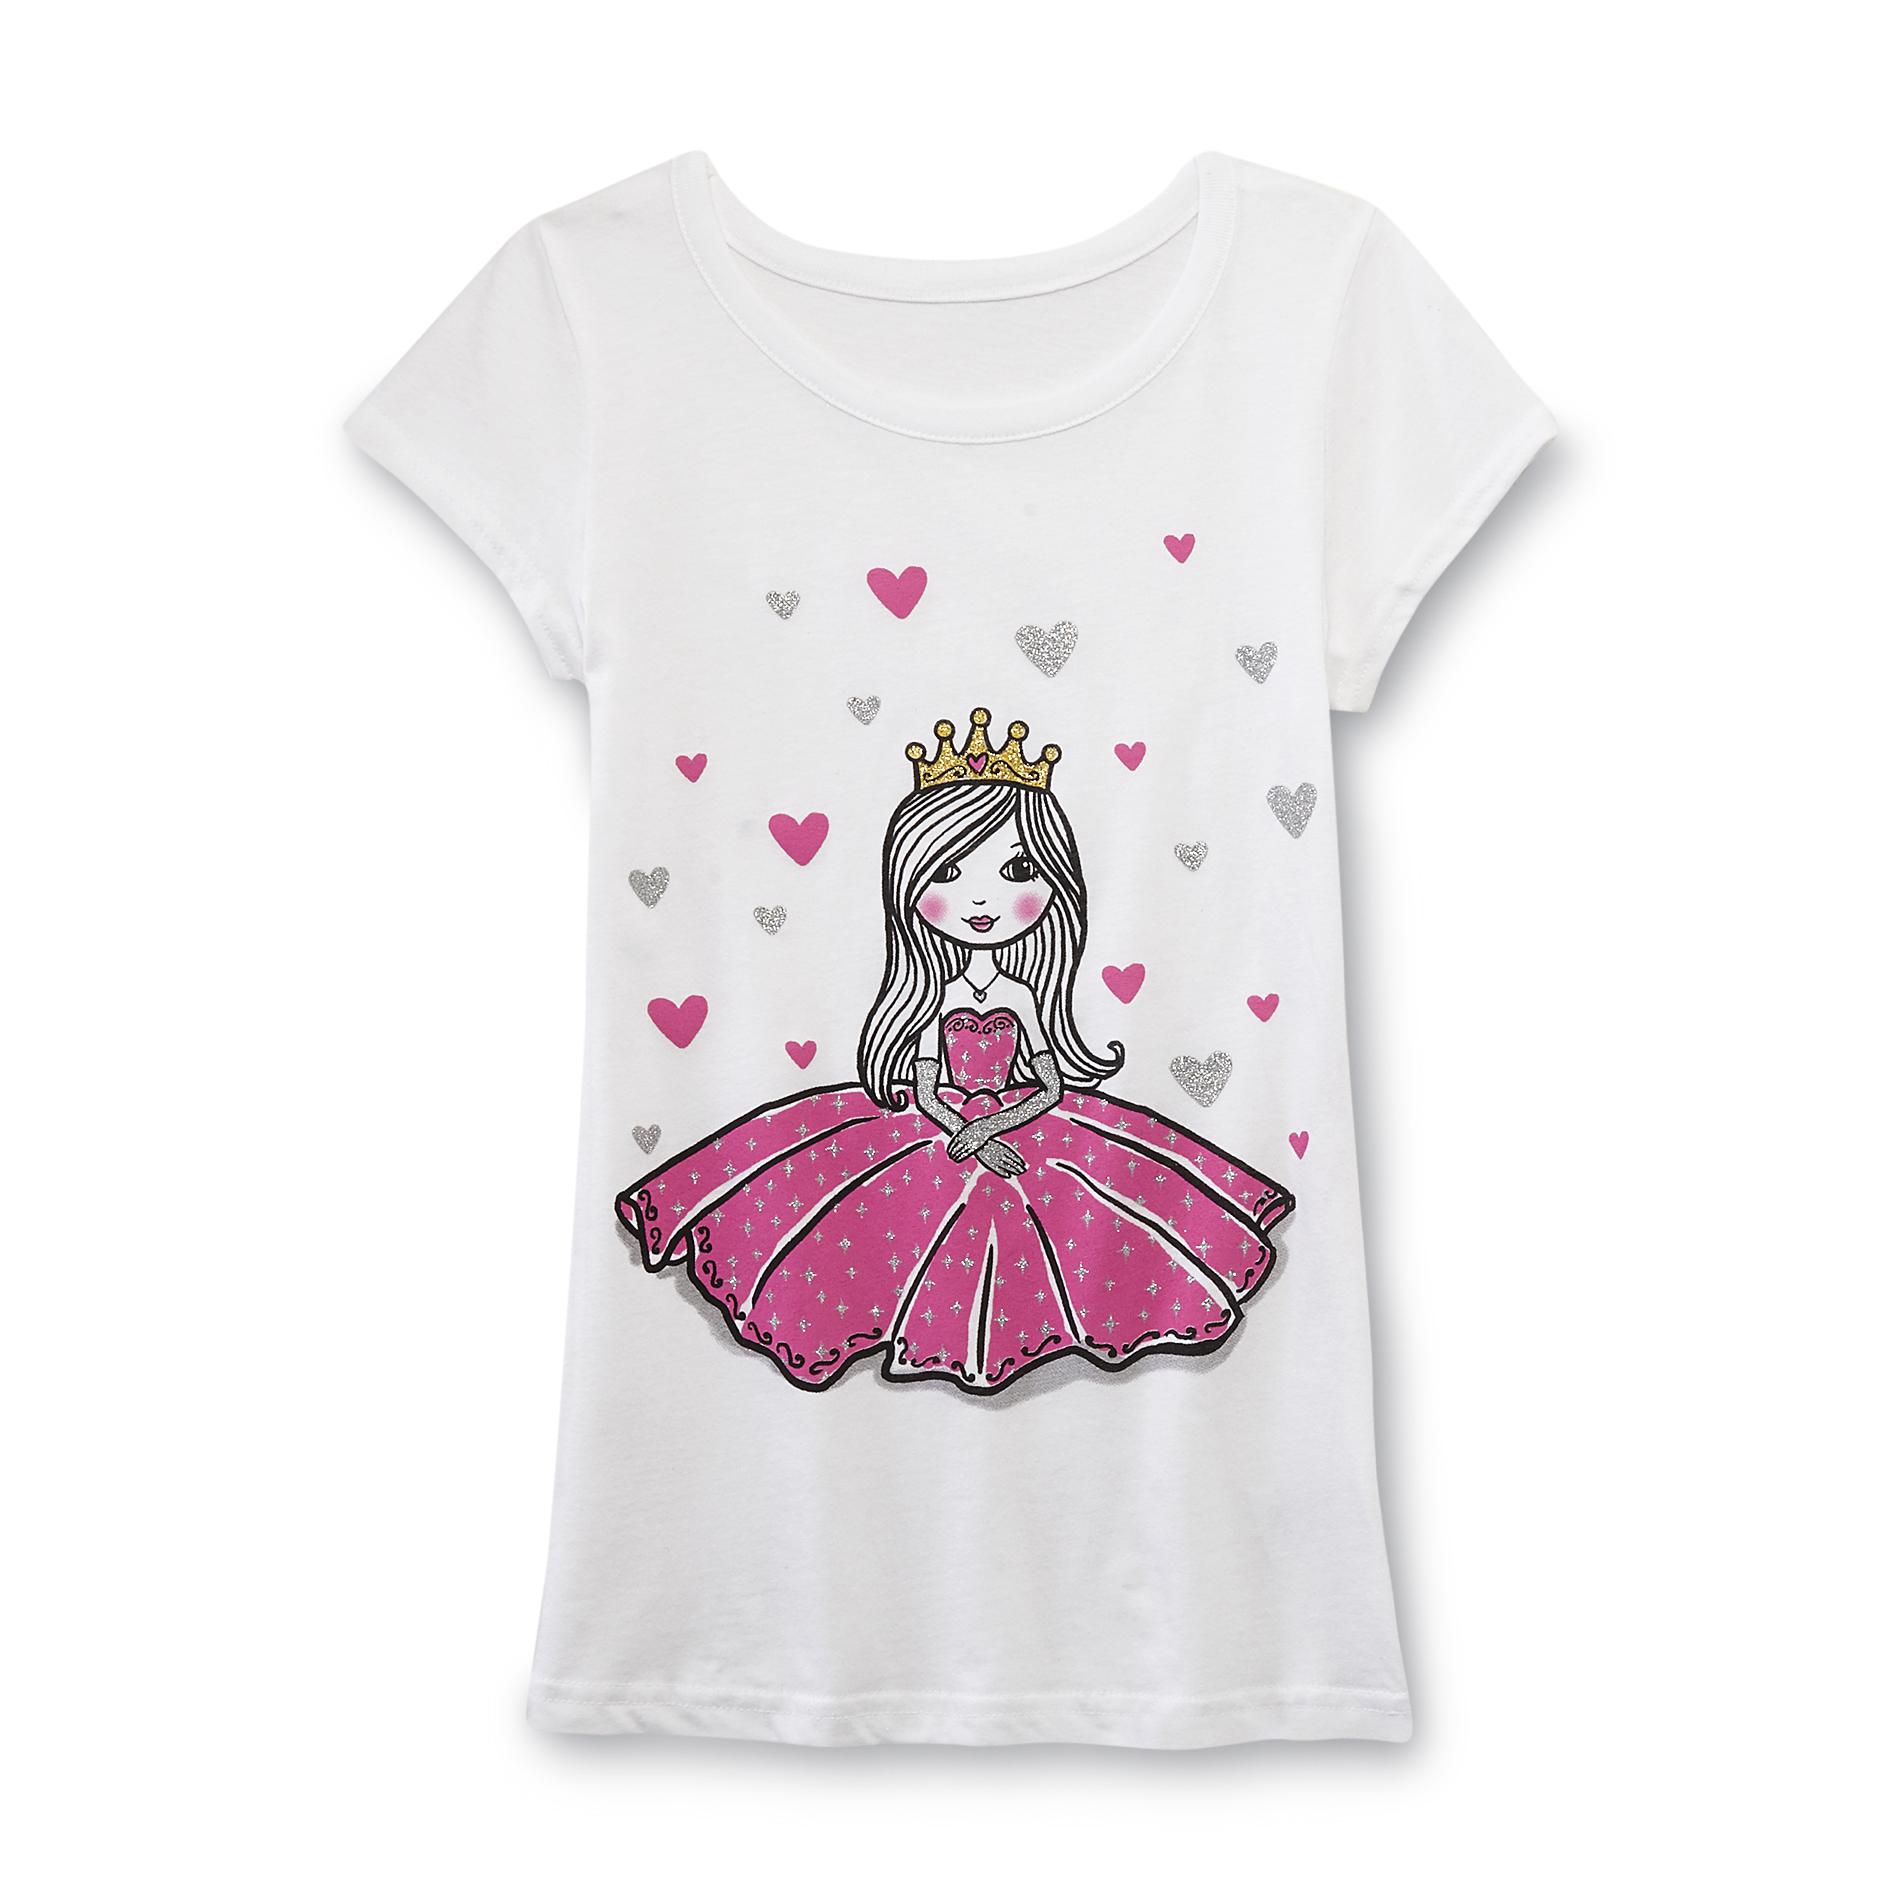 Route 66 Girl's Graphic T-Shirt - Princess & Hearts